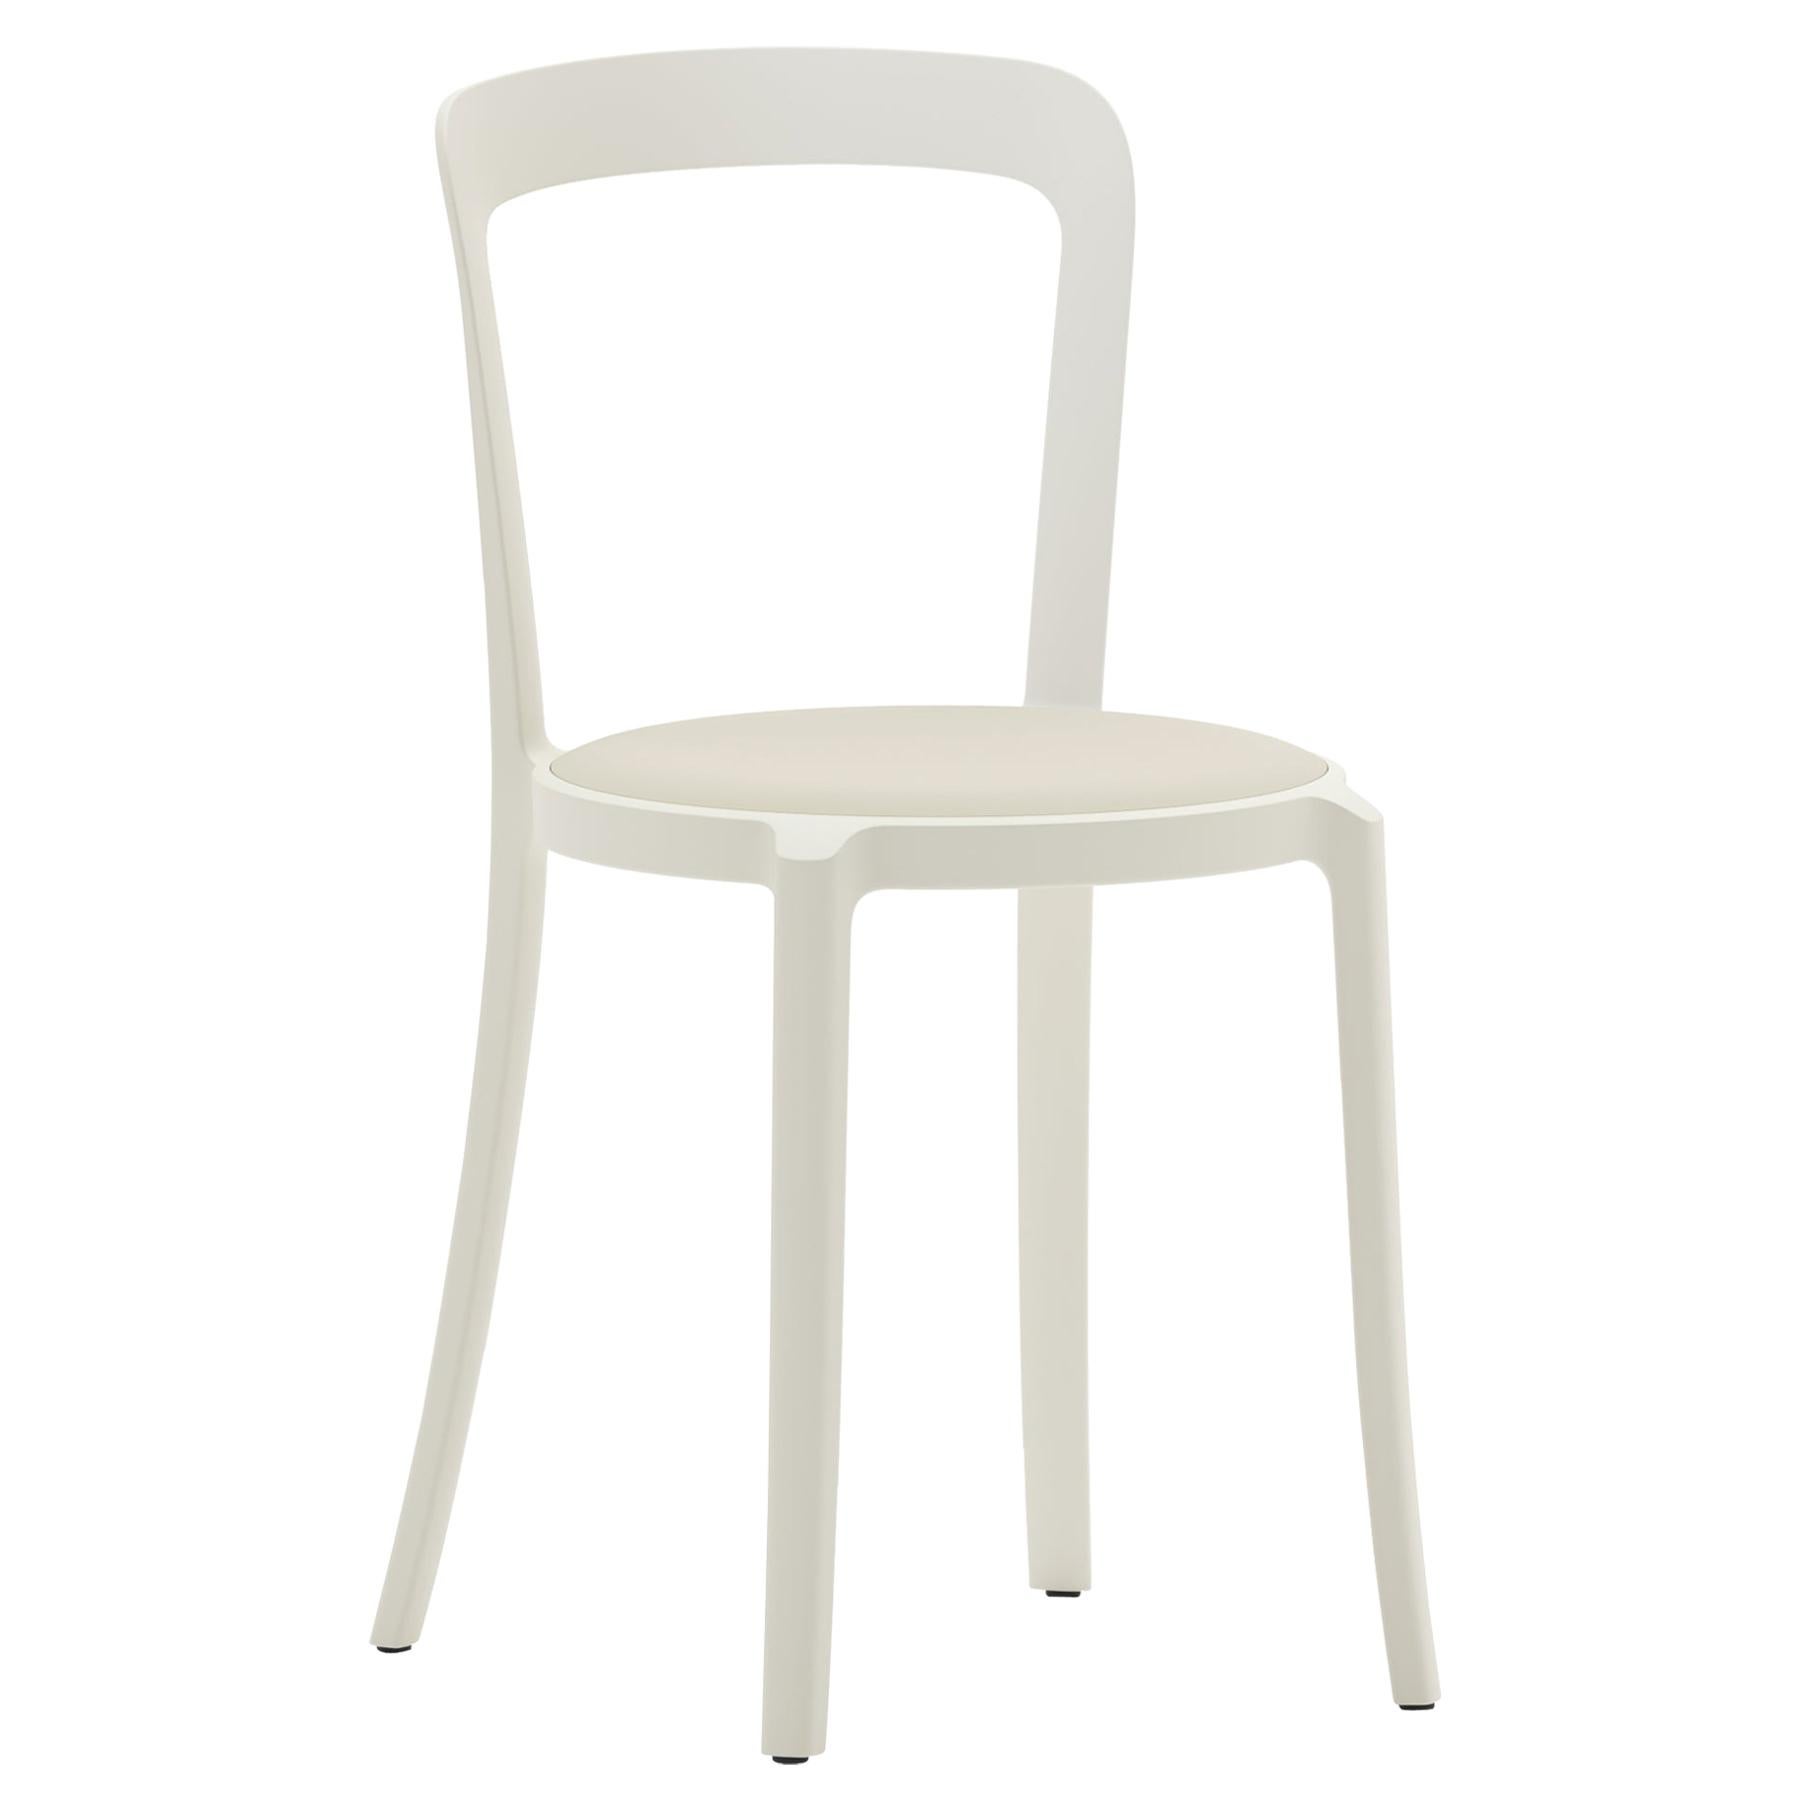 On & On Stacking Chair in Plastic with White Fabric 1 by Barber & Osgerby For Sale